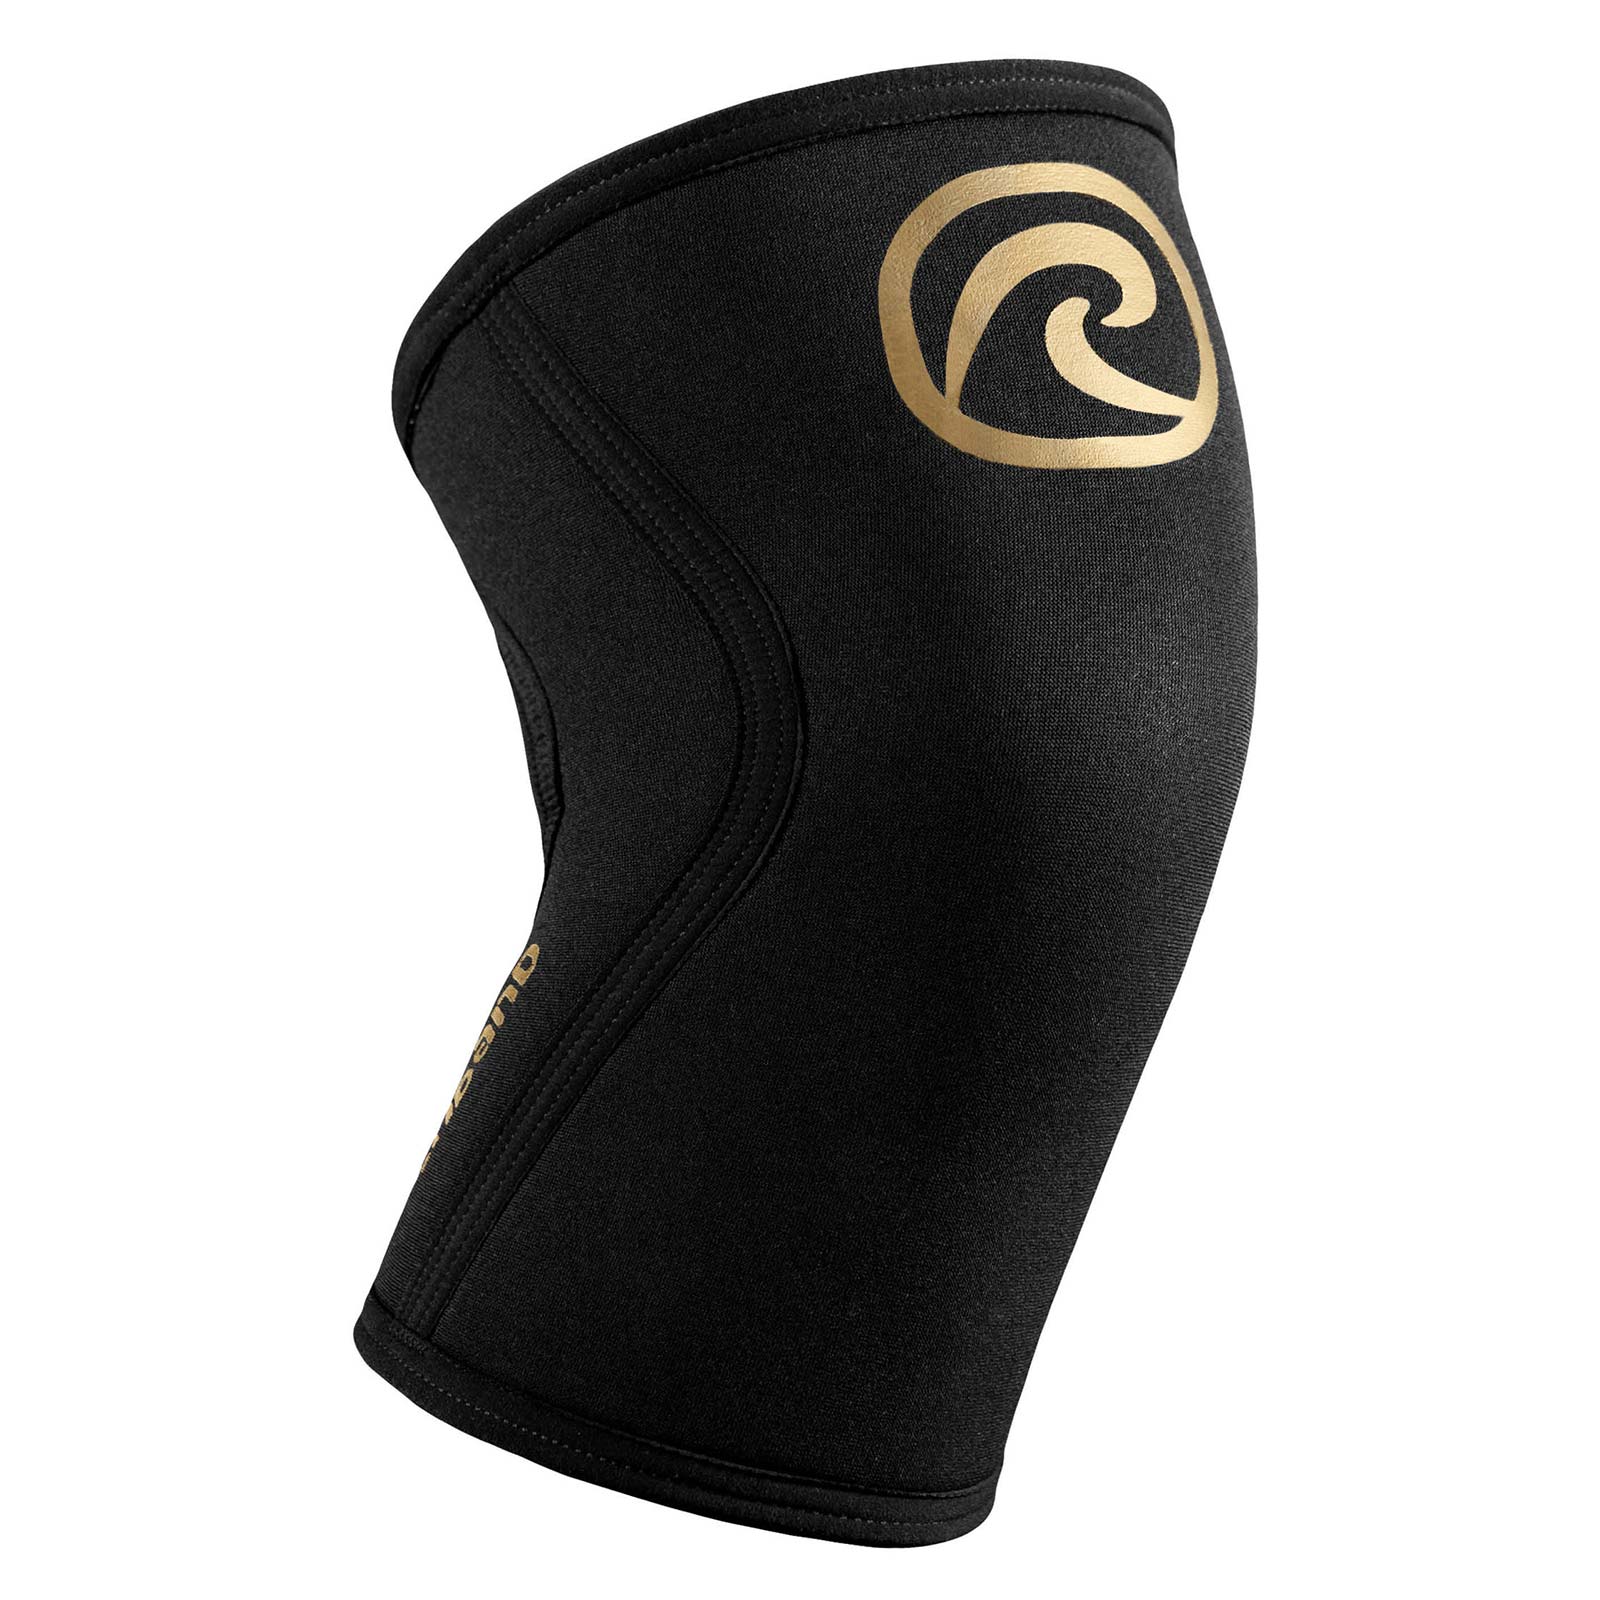 A black knee sleeve with a golden Rehband logo at the top